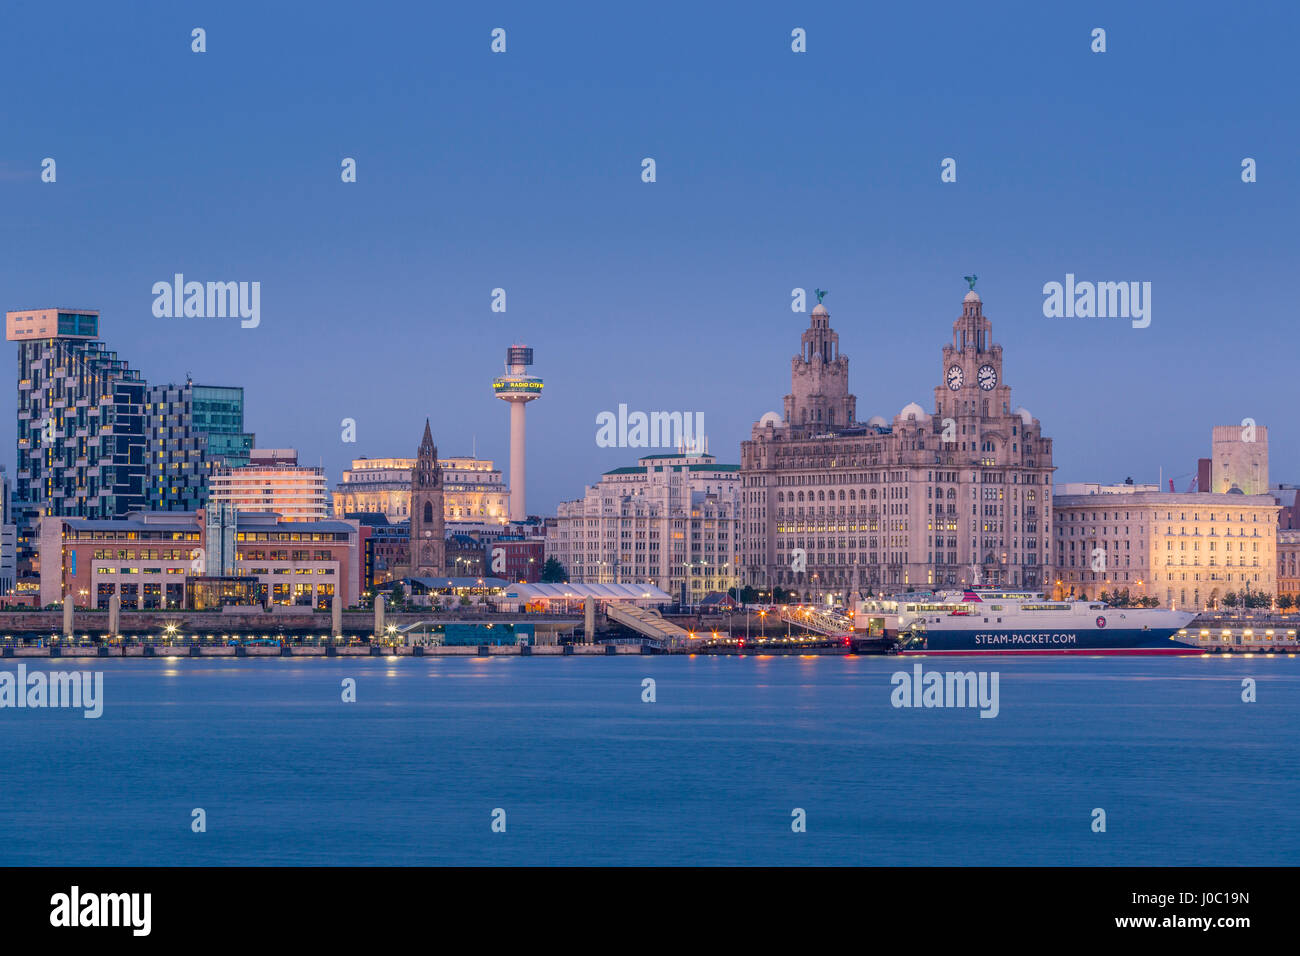 Looking across the River Mersey to the Liverpool skyline and Liver buildings at dusk, Liverpool, Merseyside, England, UK Stock Photo